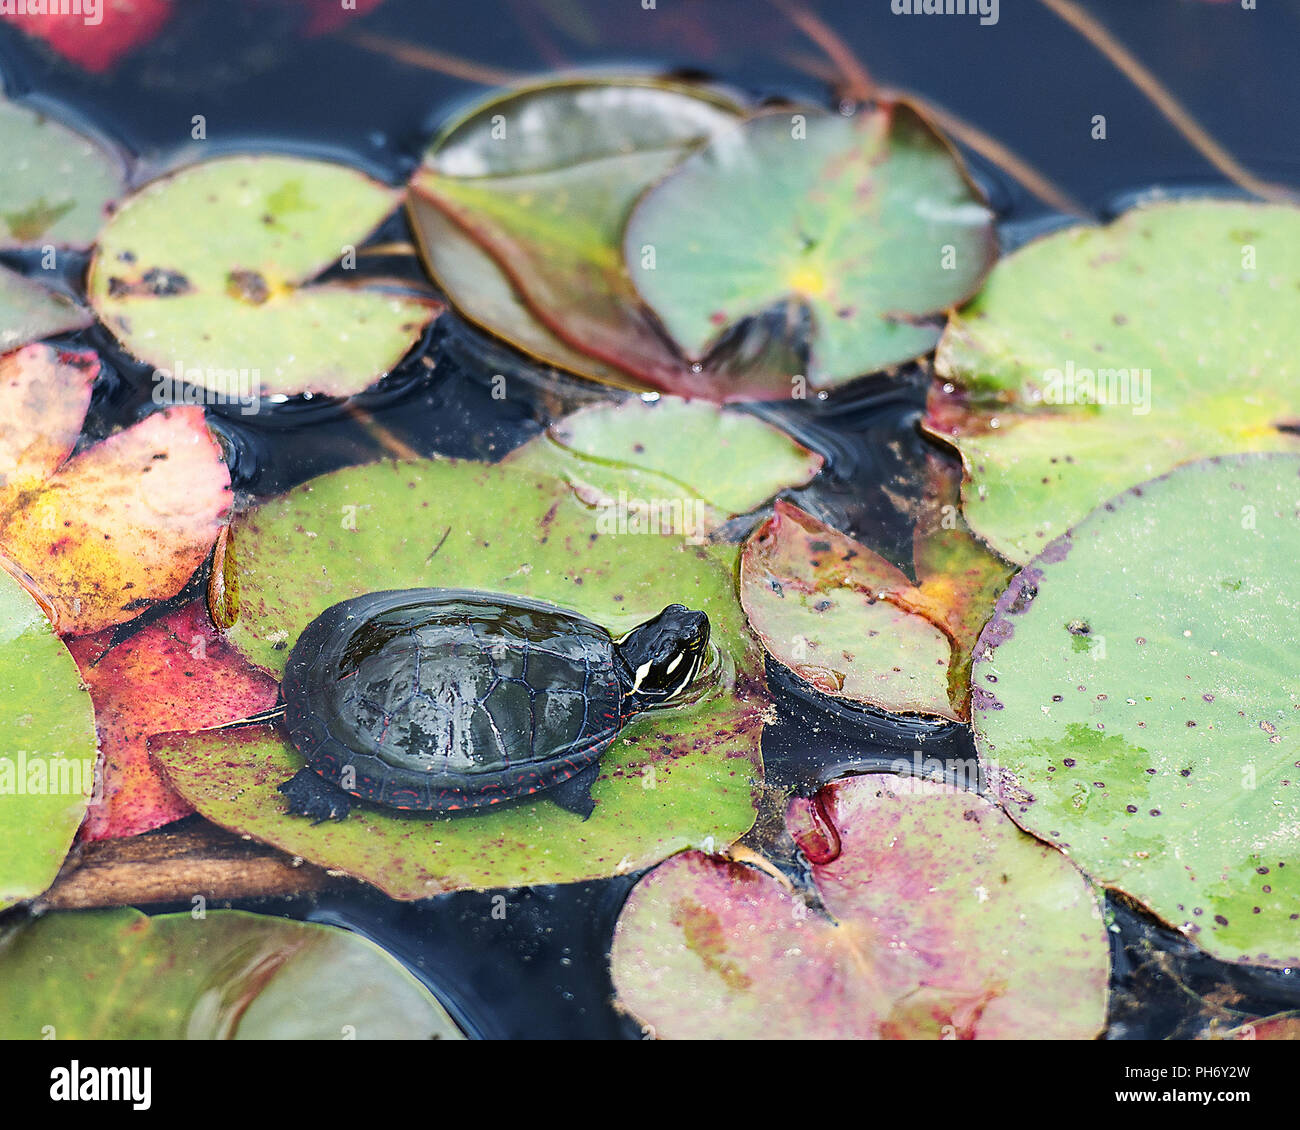 Painted turtle baby on a lily pad enjoying its surrounding. Stock Photo